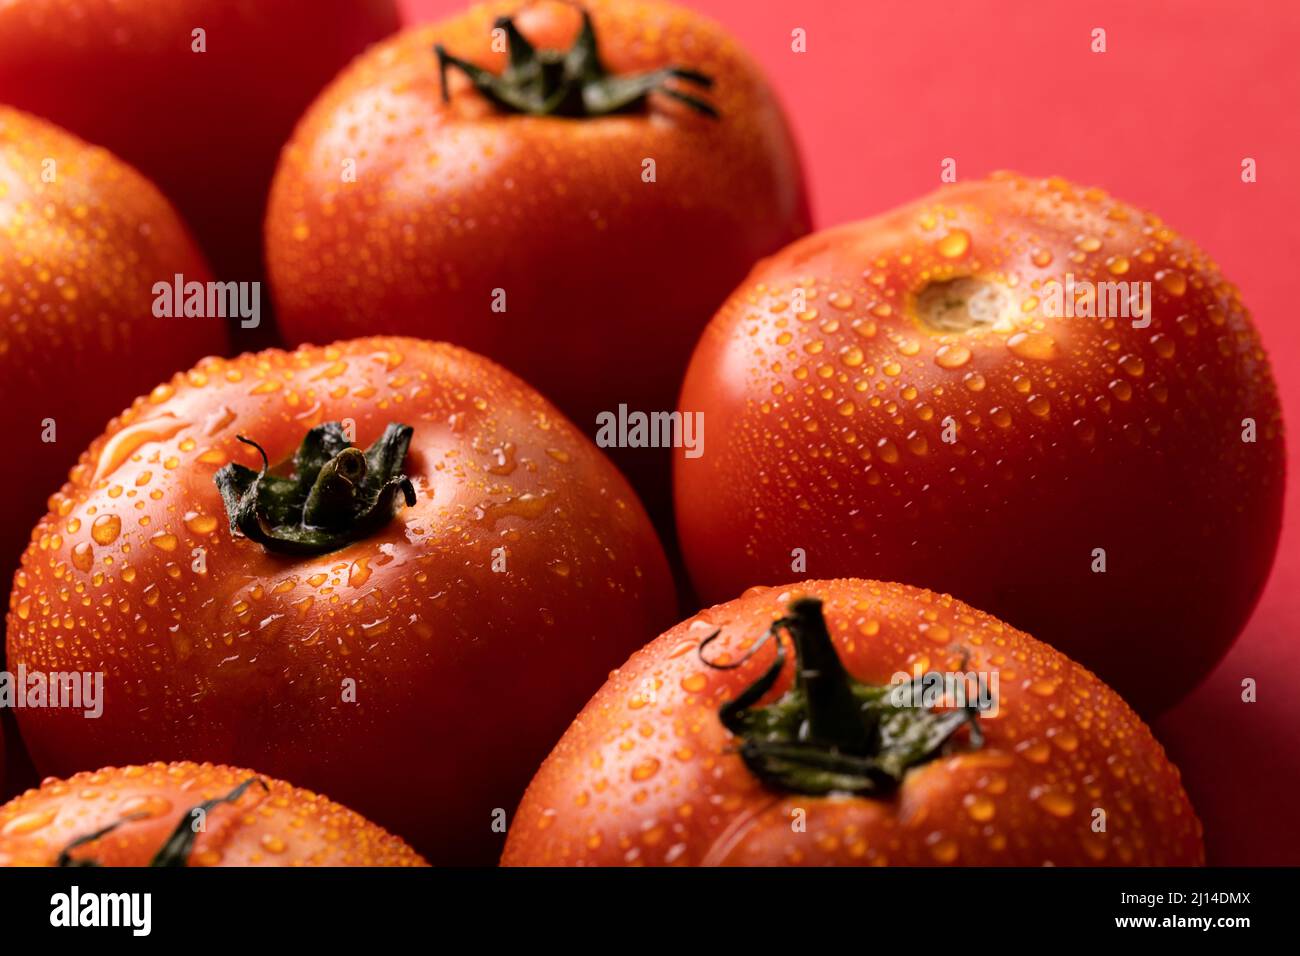 Close-up of fresh red tomatoes with water drops over colored background Stock Photo